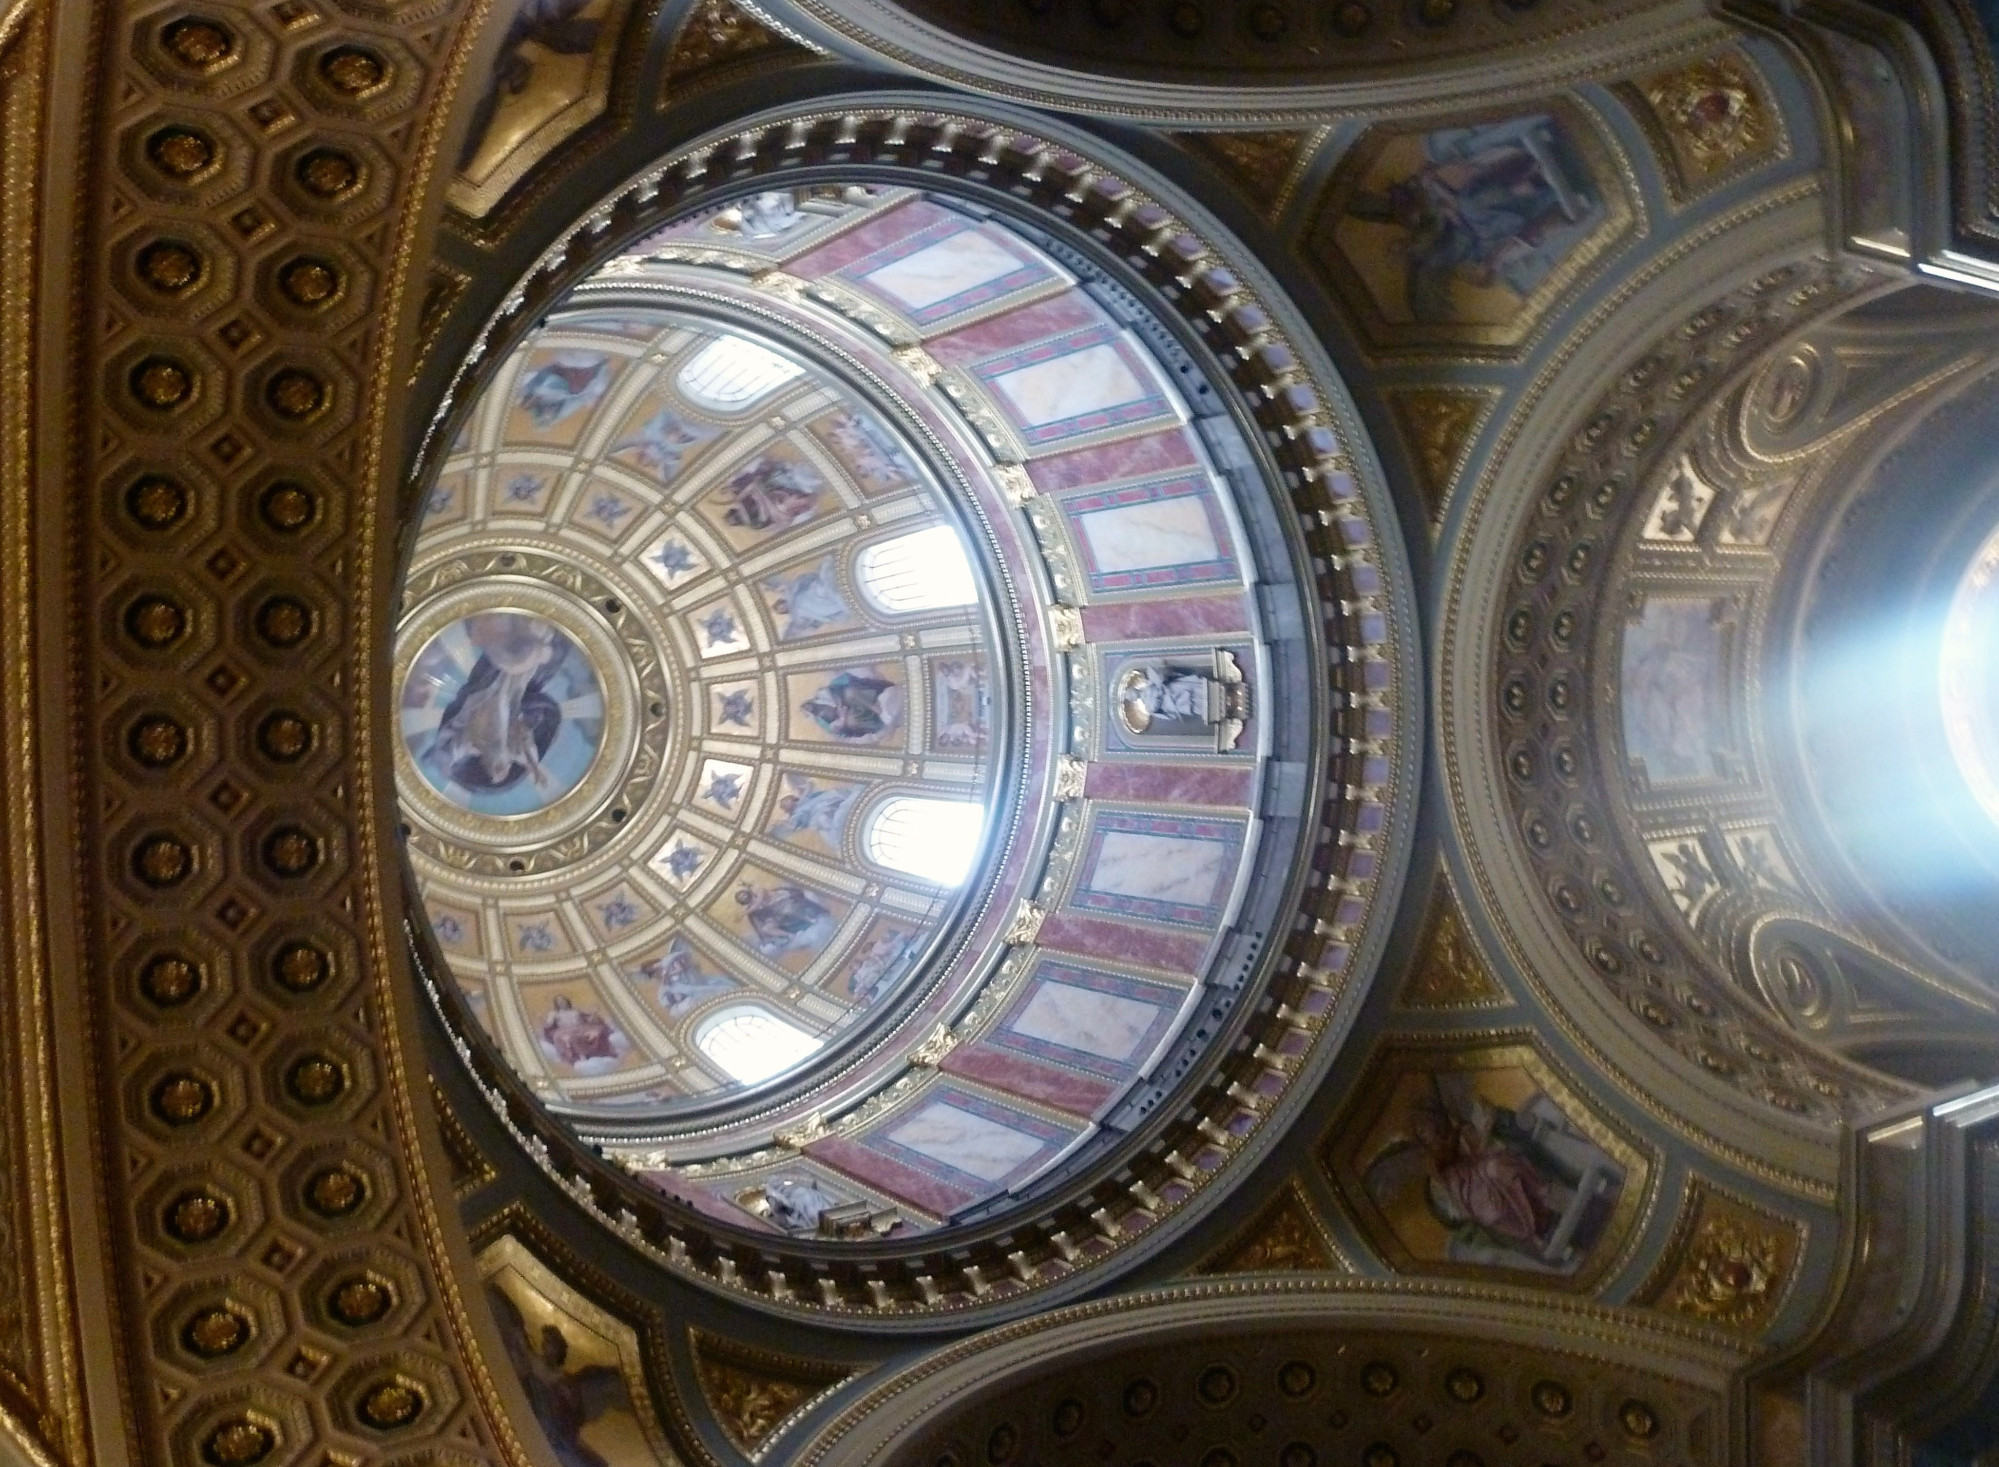 The Dome paintings